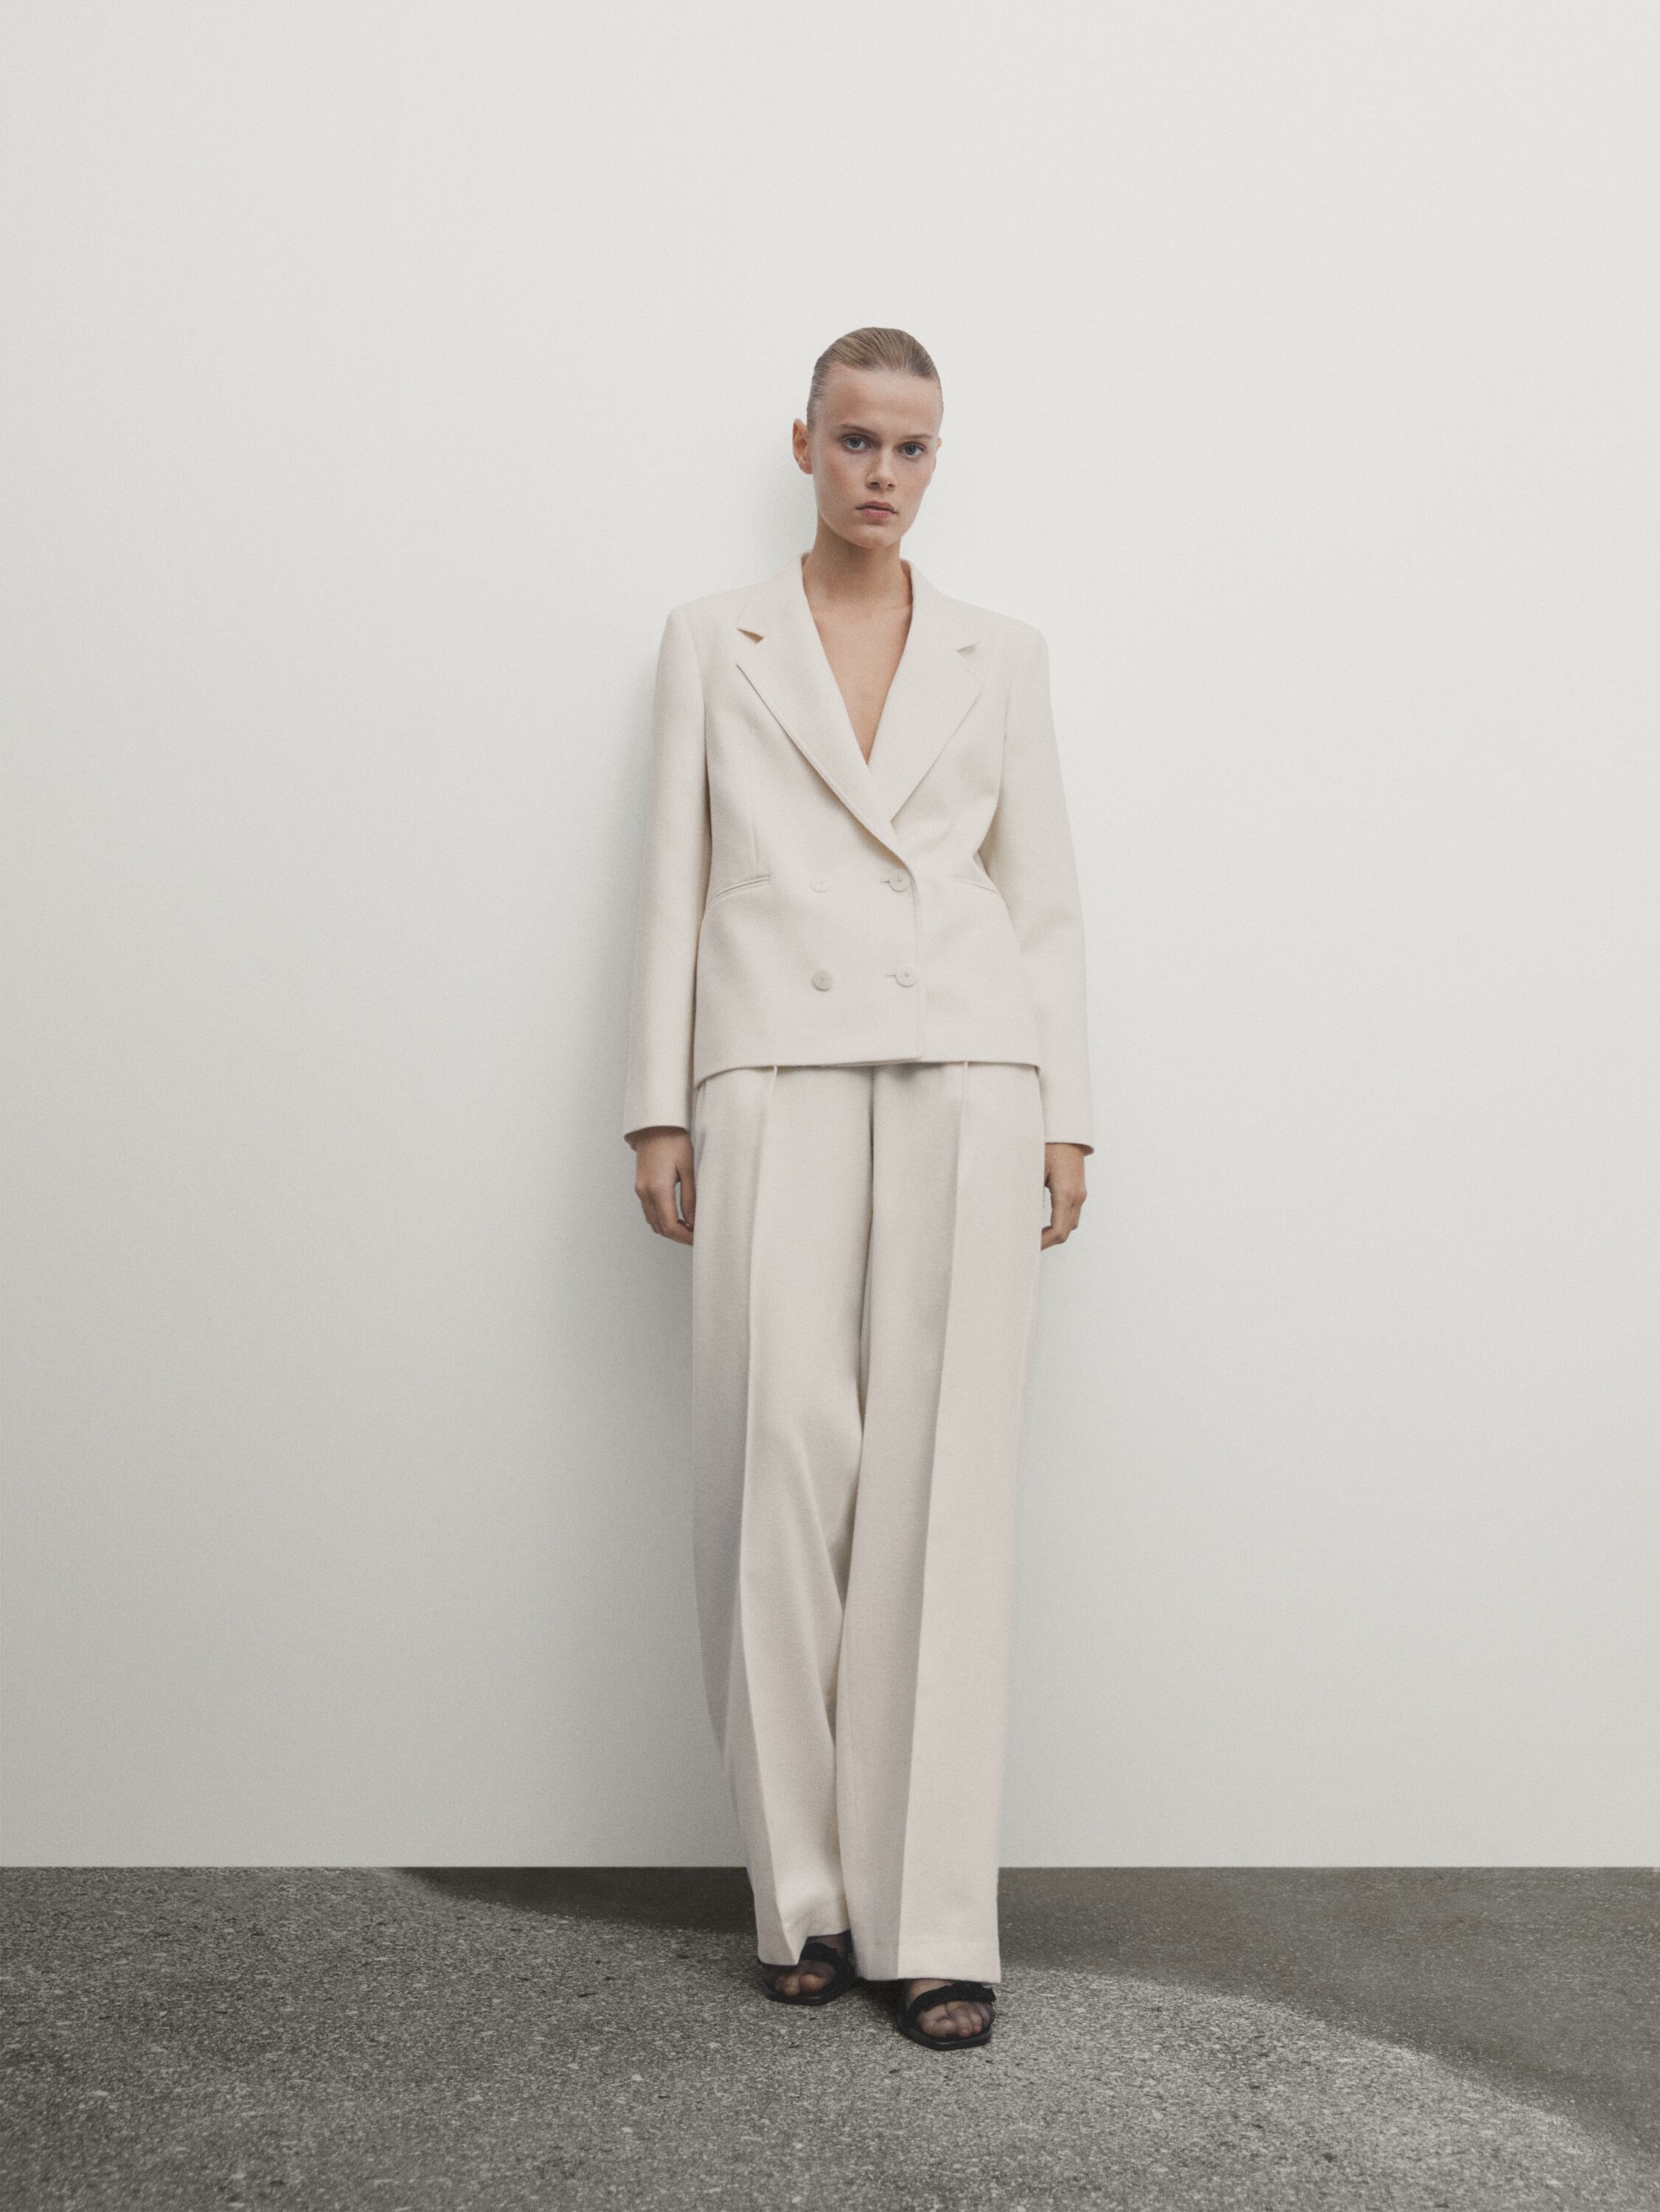 Wide-leg suit trousers with an elastic waistband